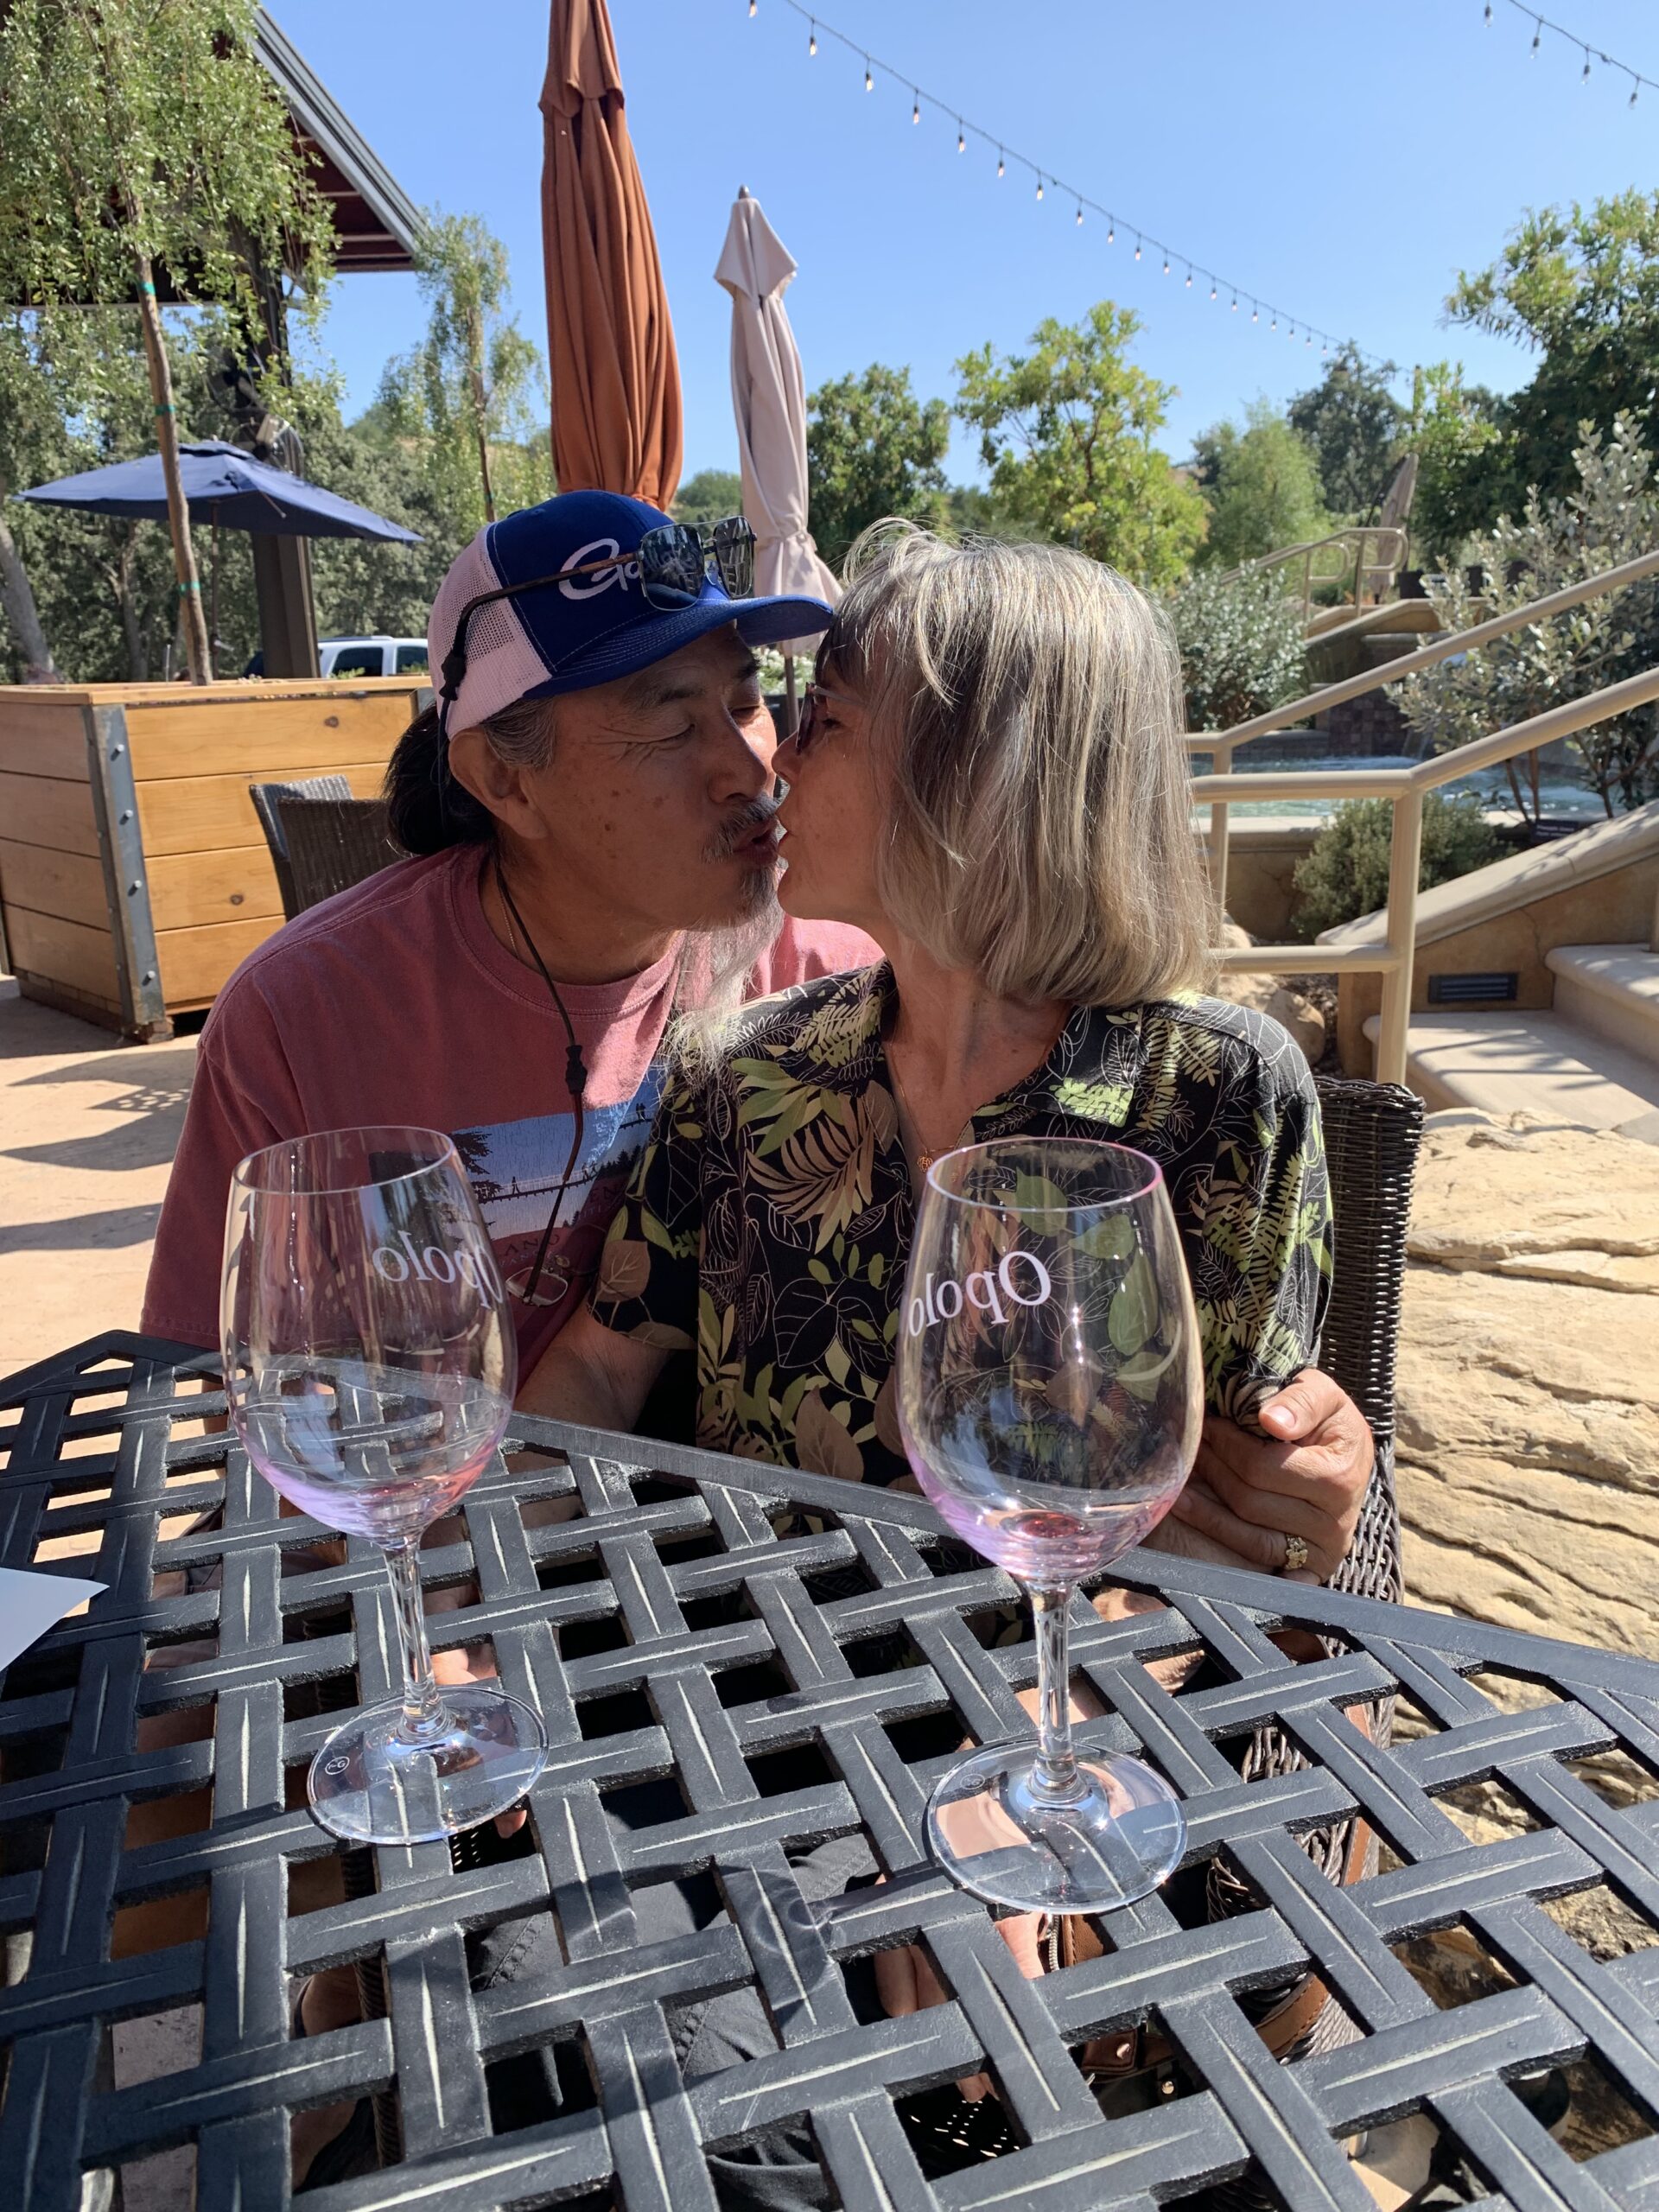 Two people about to kiss at an outdoor table with two empty wine glasses on it